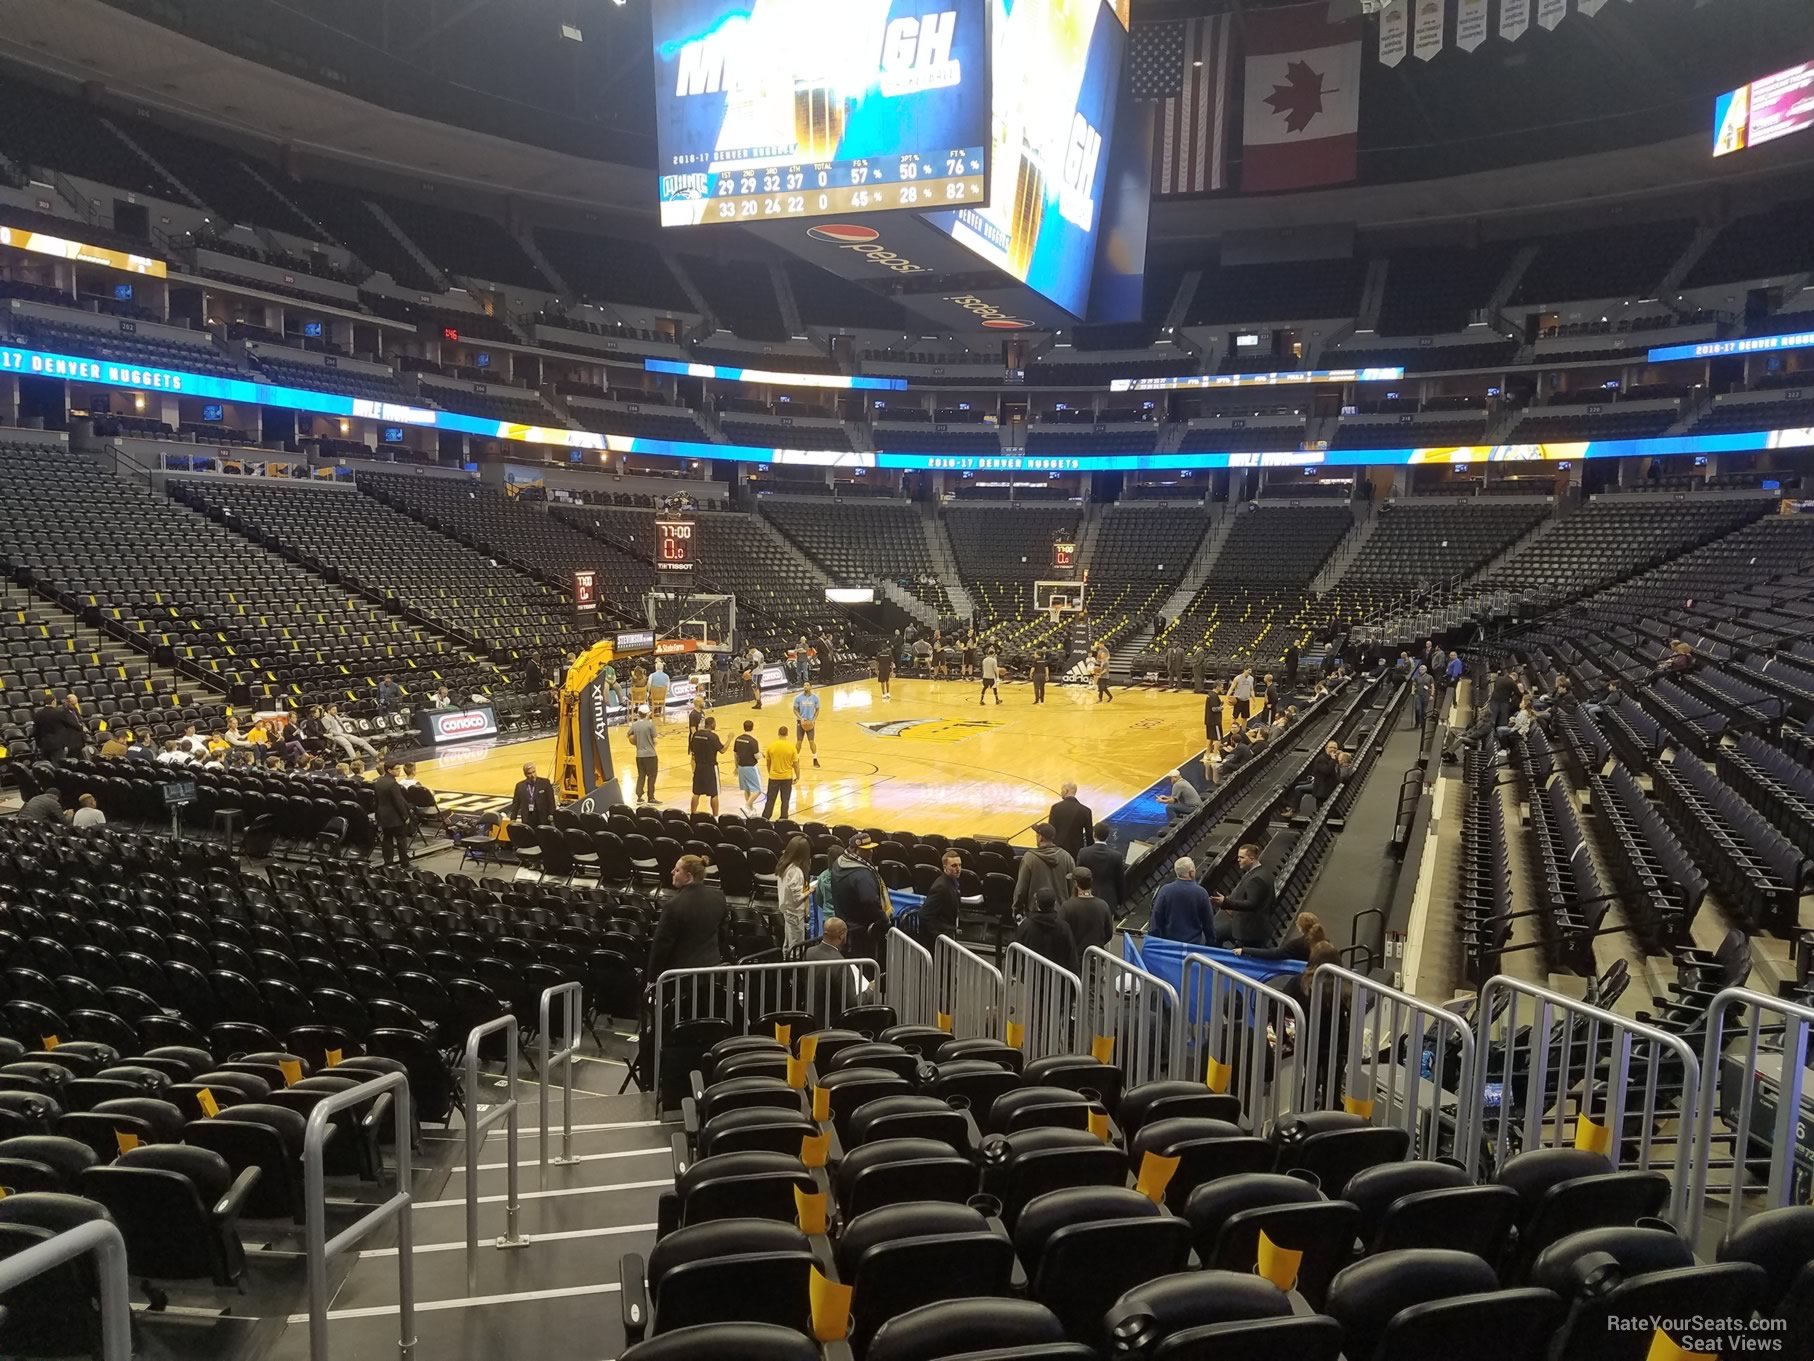 section 132, row 11 seat view  for basketball - ball arena